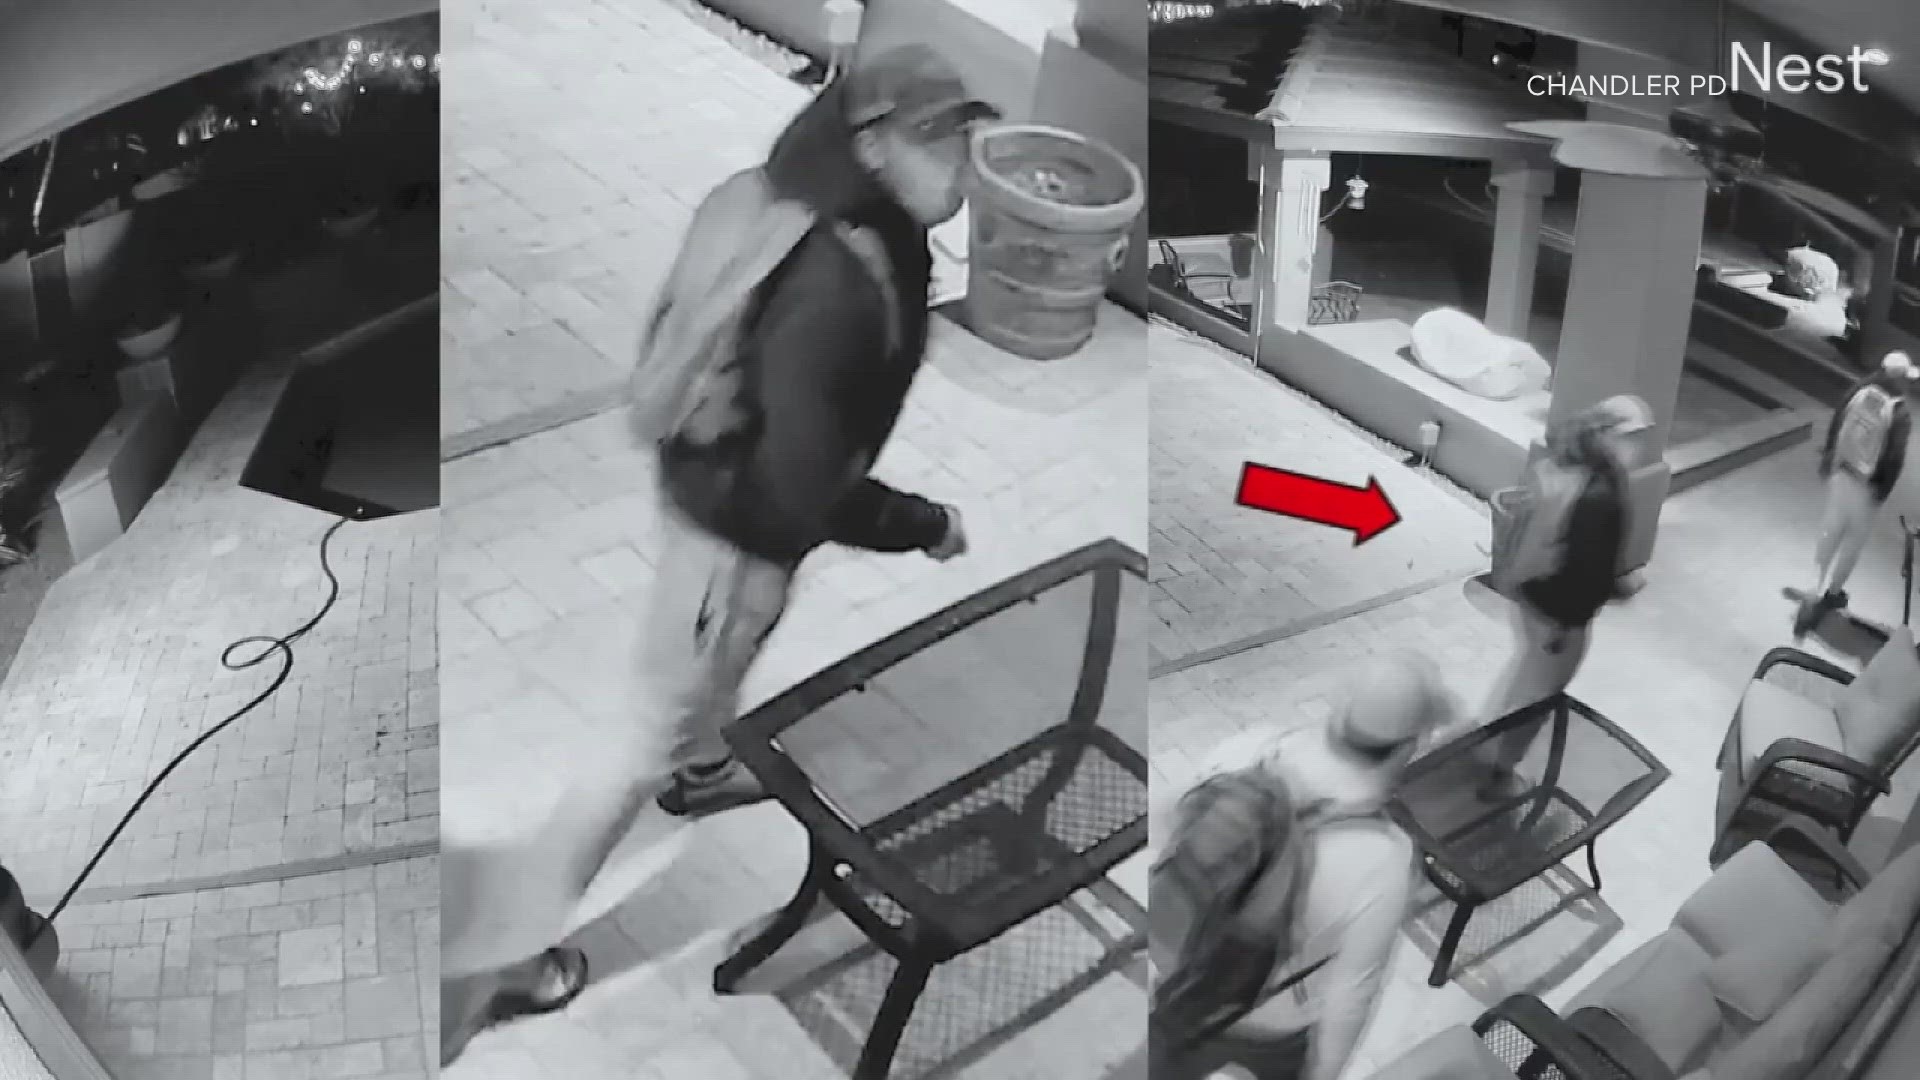 Chandler police are investigating four incidents they say are similar to Scottsdale's "dinnertime burglaries."